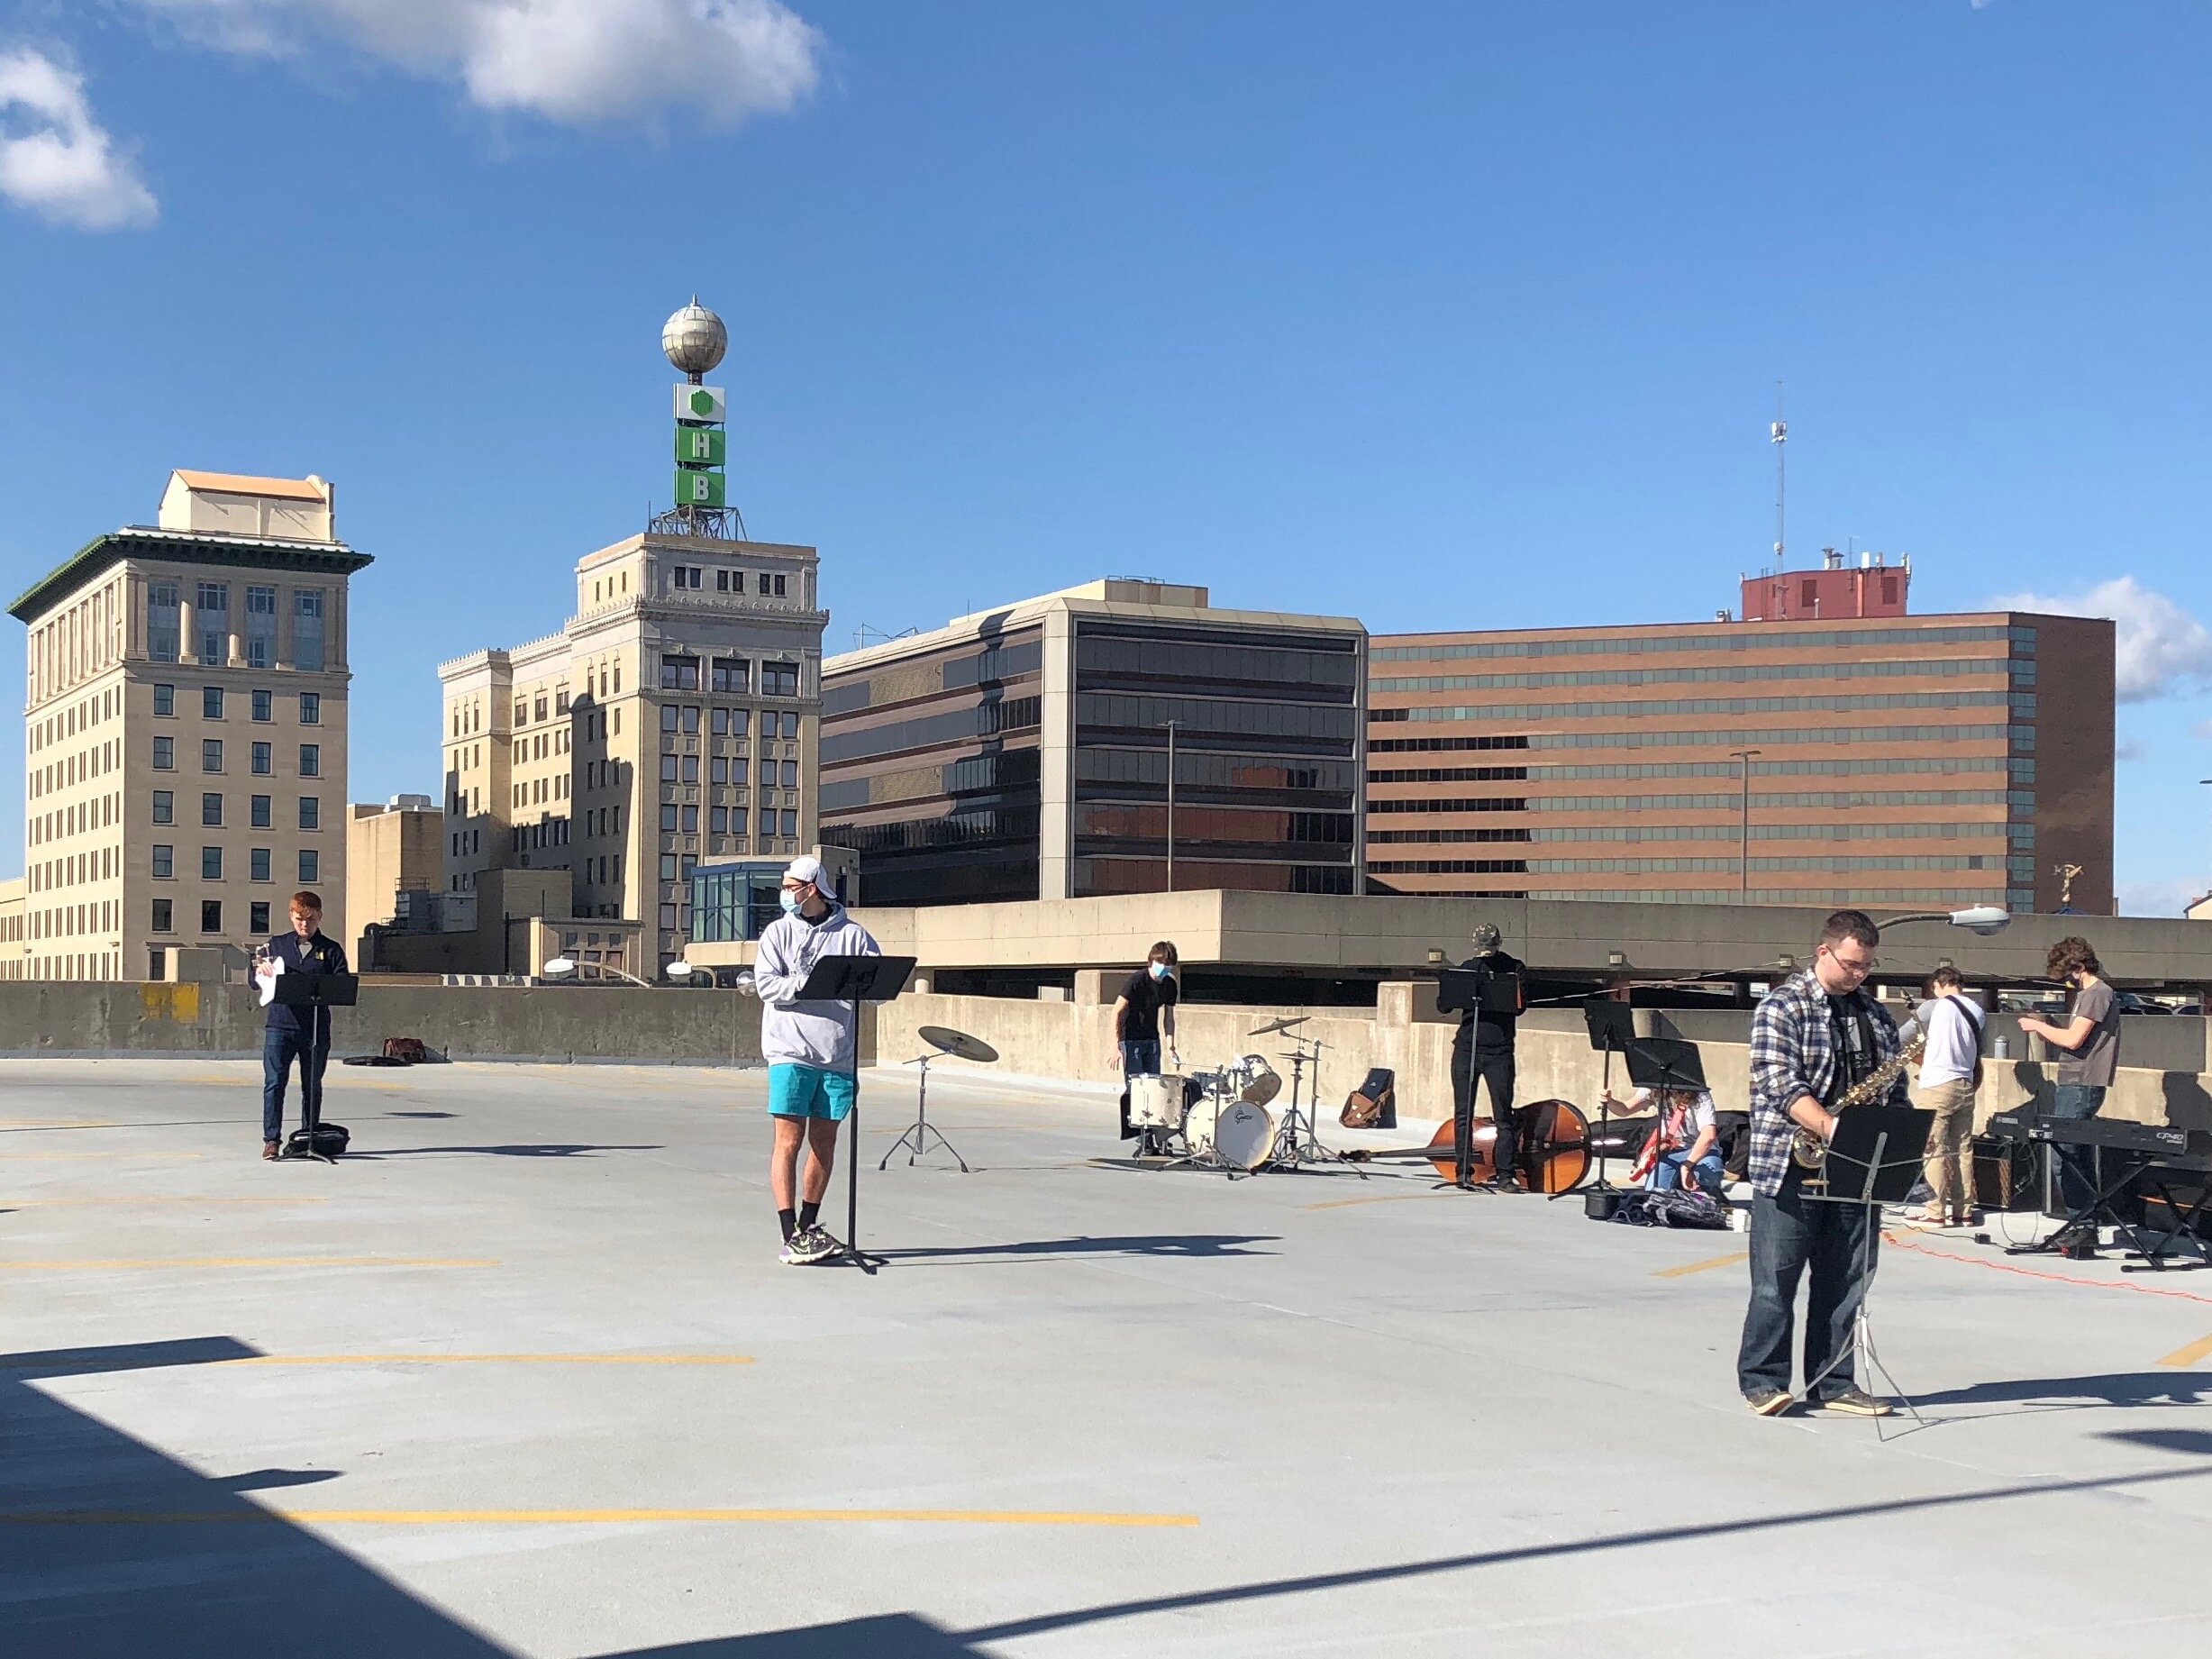 The UM-Flint Jazz Ensemble setting up for an October performance on the roof of a parking garage.